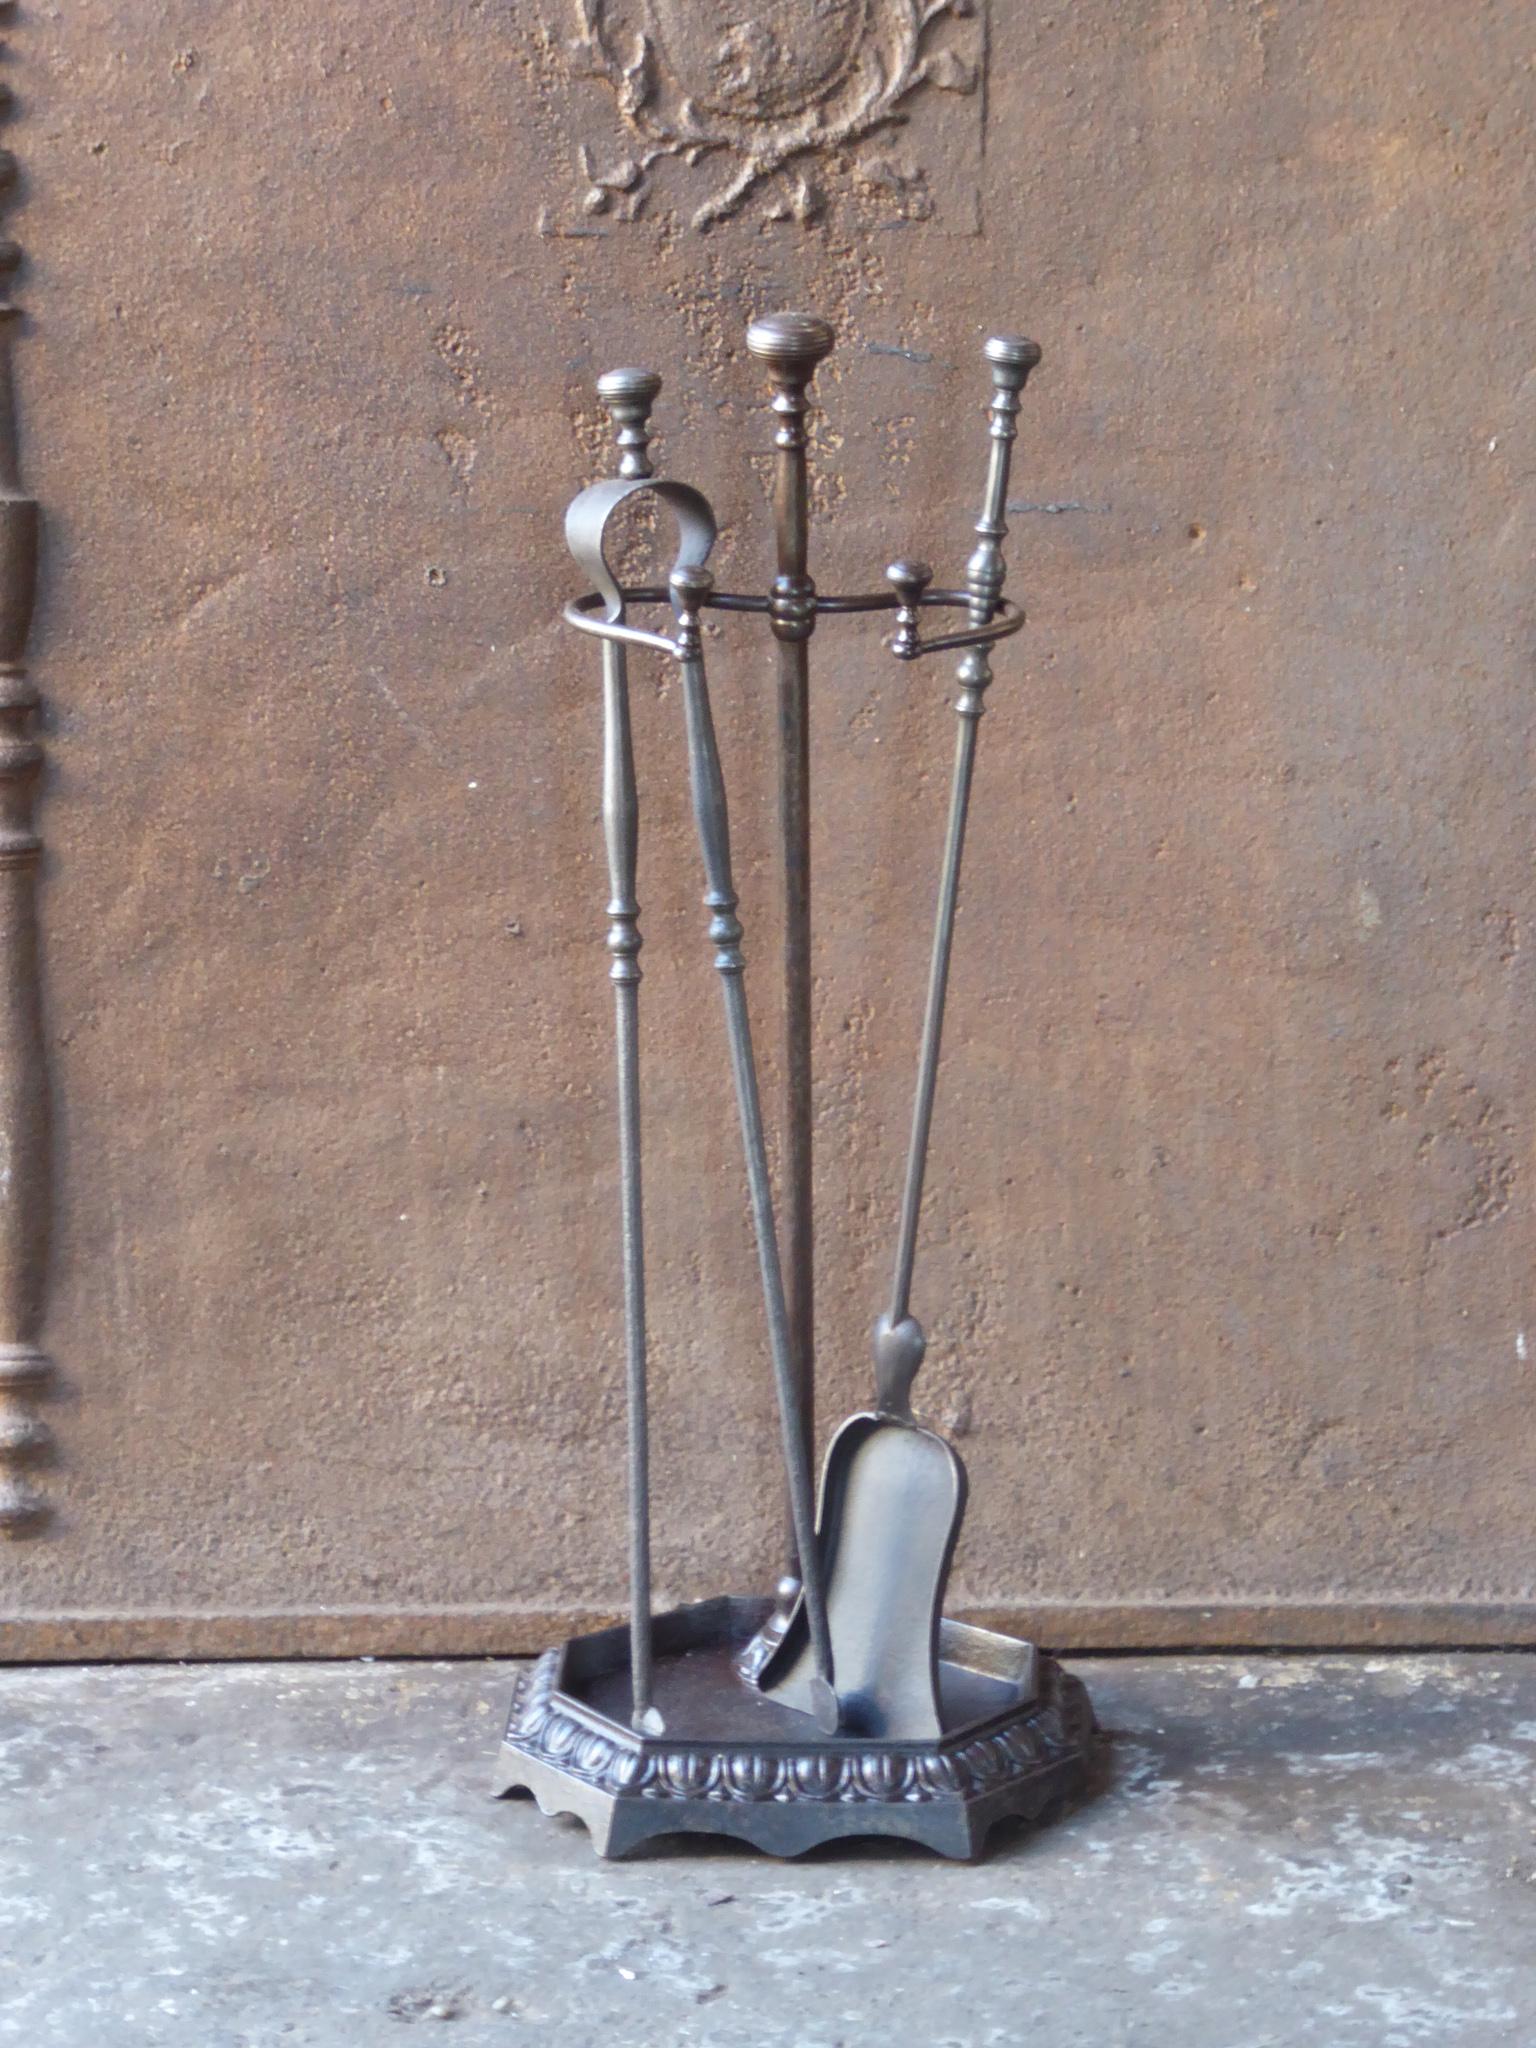 19th century French Napoleon III fireplace tool set. The toolset consists of a Stand and two fire irons. Made of wrought iron and cast iron. It is in a good condition and is fully functional.
 
 





 